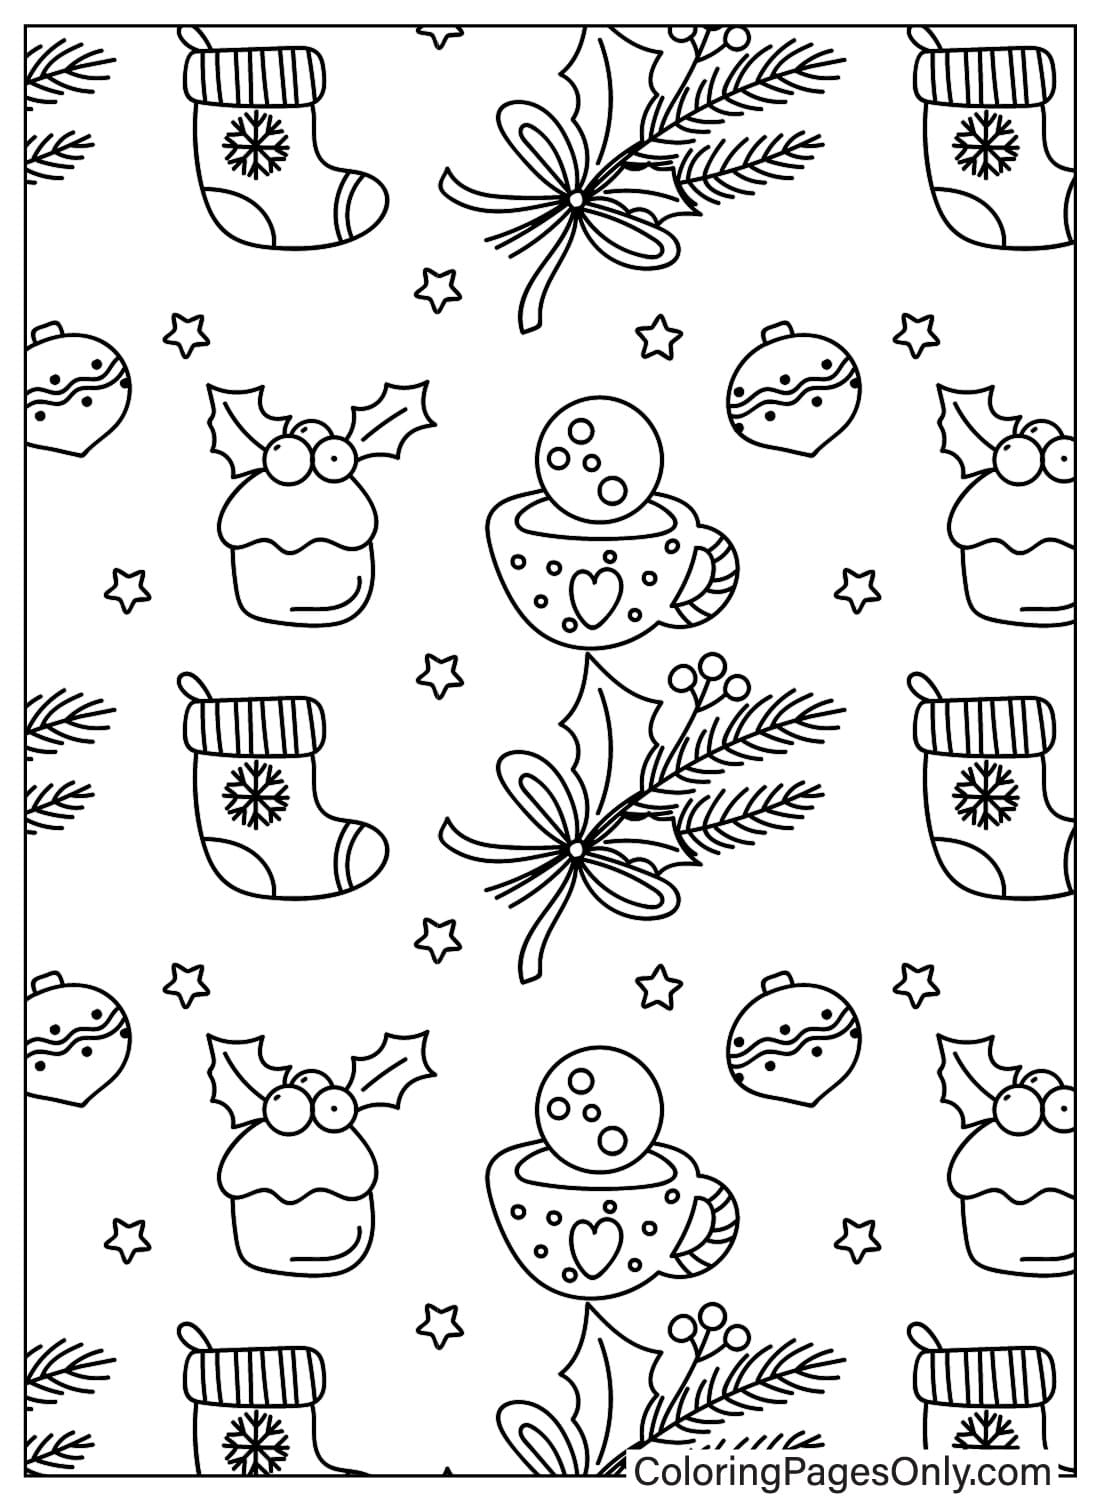 Christmas Pattern Coloring Page JPG - Free Printable Coloring Pages